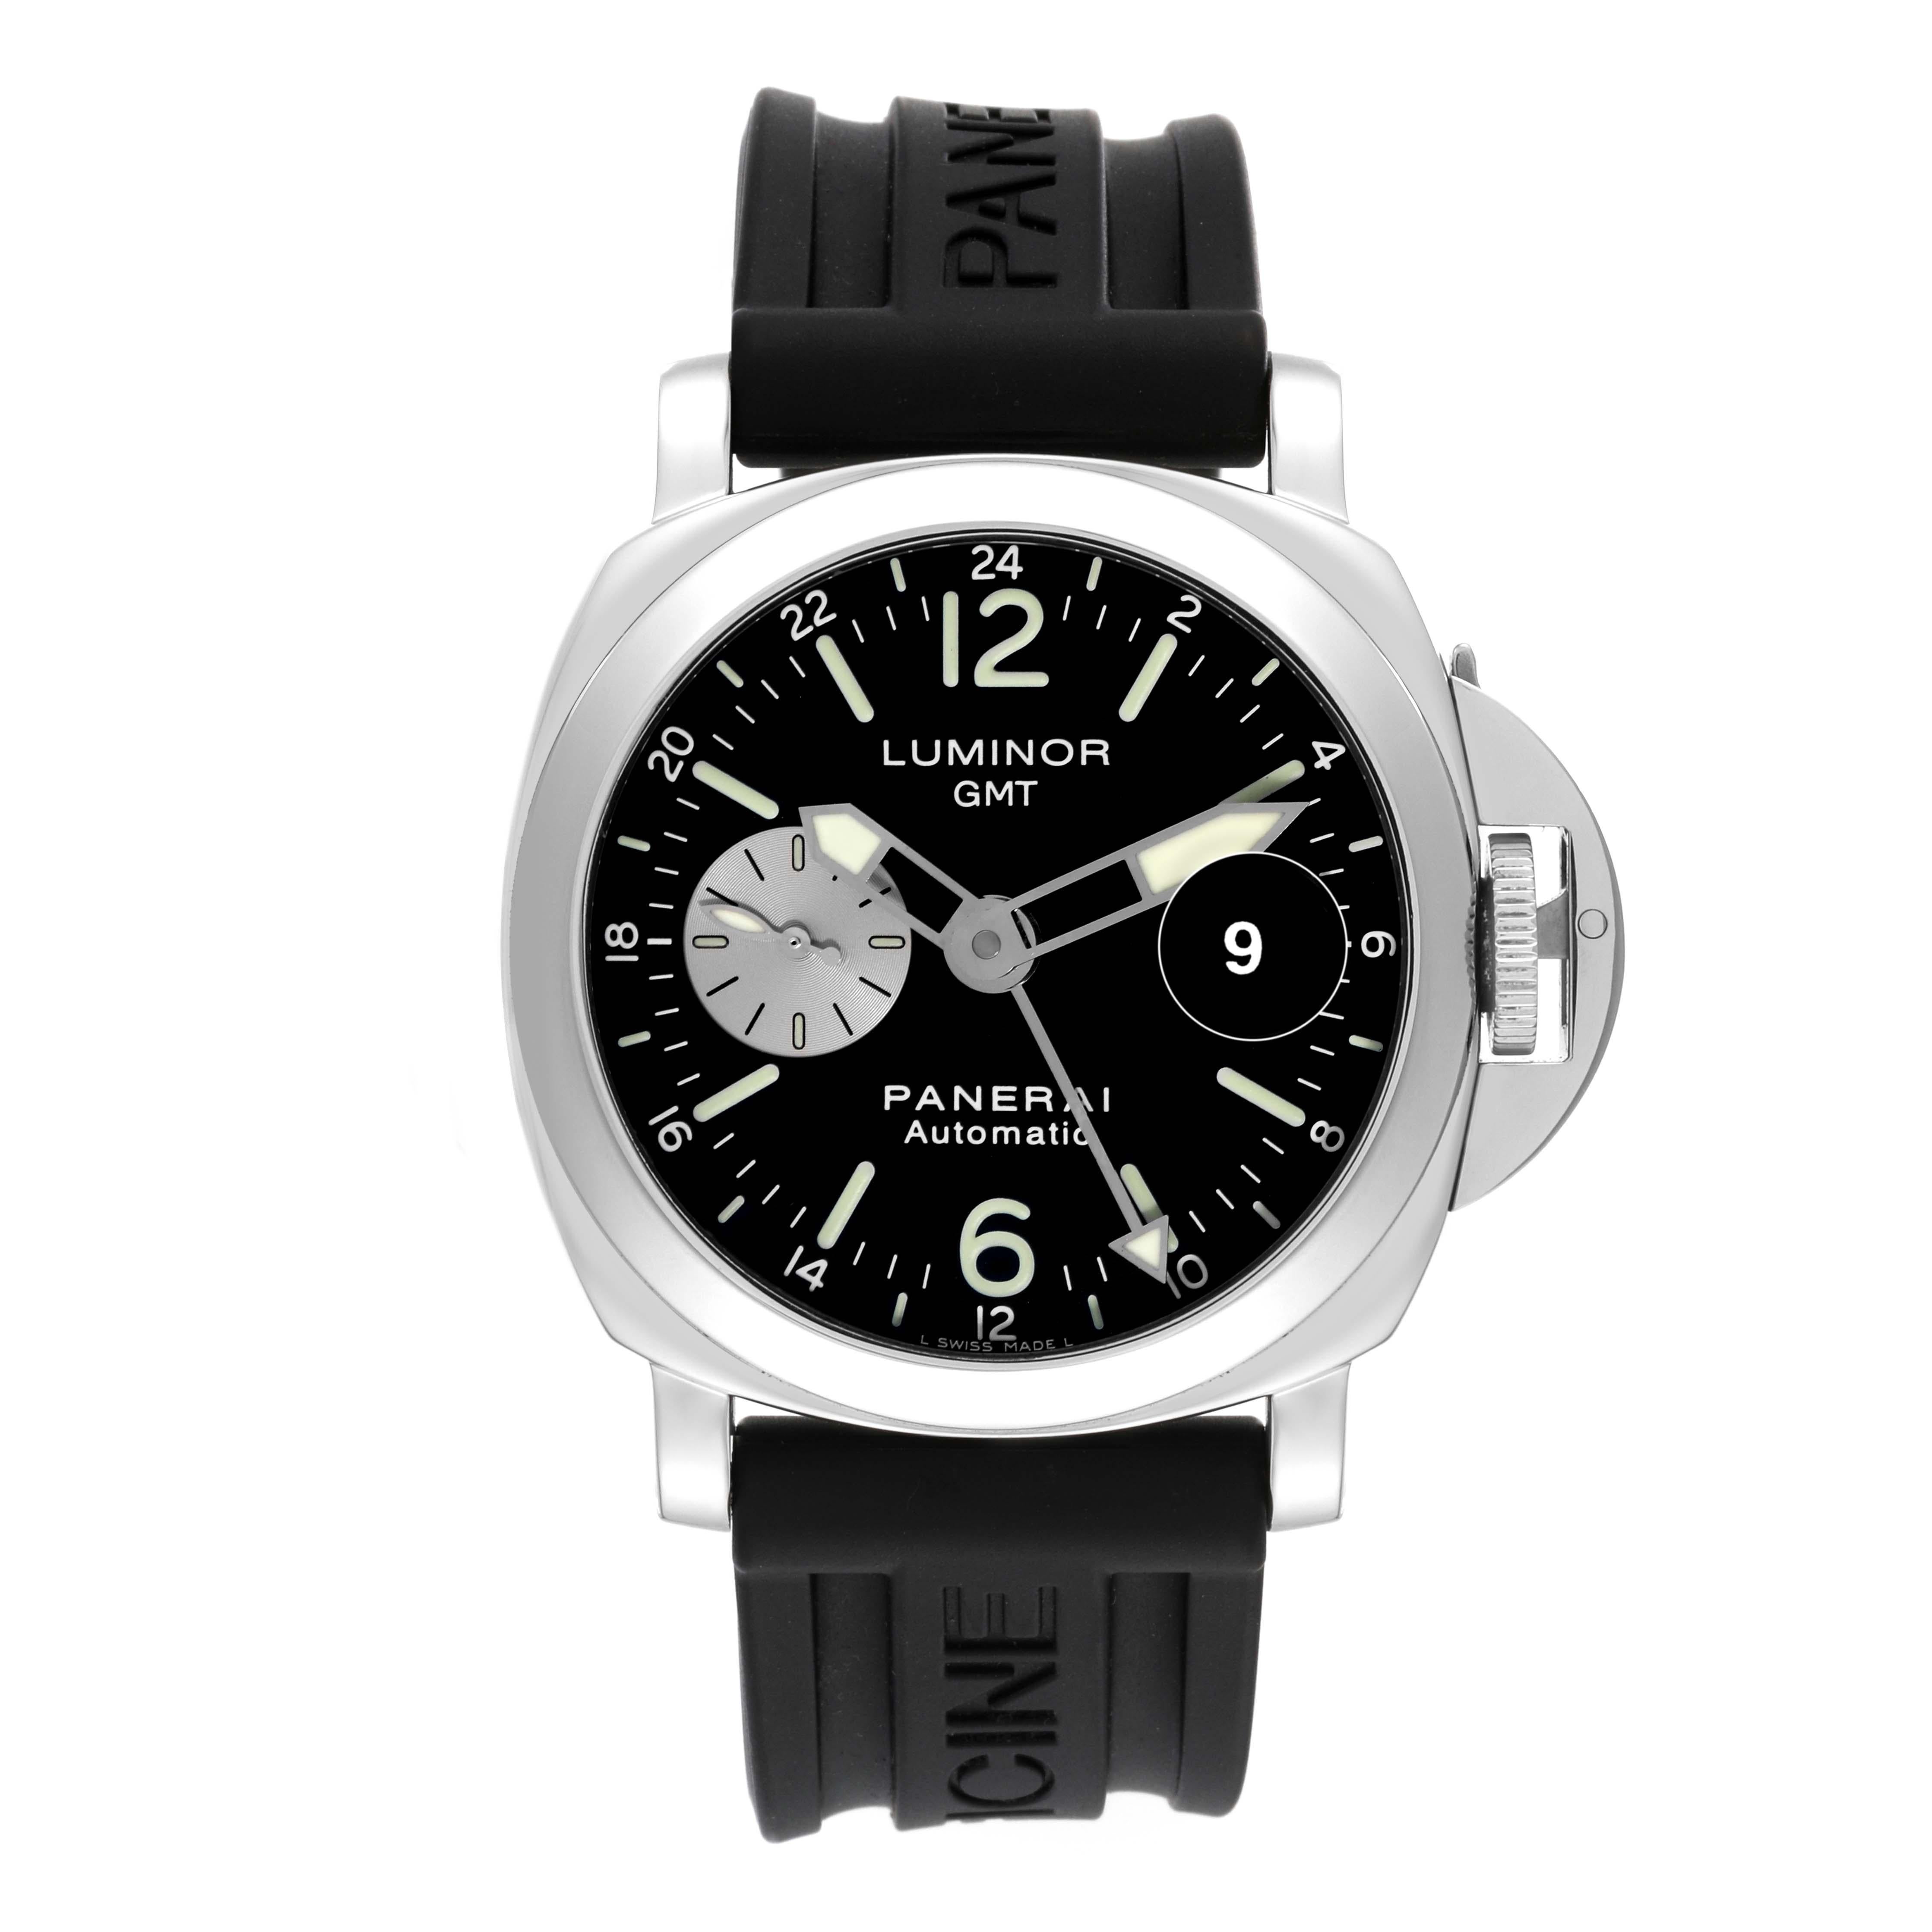 Panerai Luminor GMT Automatic Steel Mens Watch PAM00088 Box Papers. Automatic self-winding movement. GMT function. Two part, polished and brushed cushion shaped stainless steel case 44.0 mm in diameter. Polished Panerai patented crown protector.